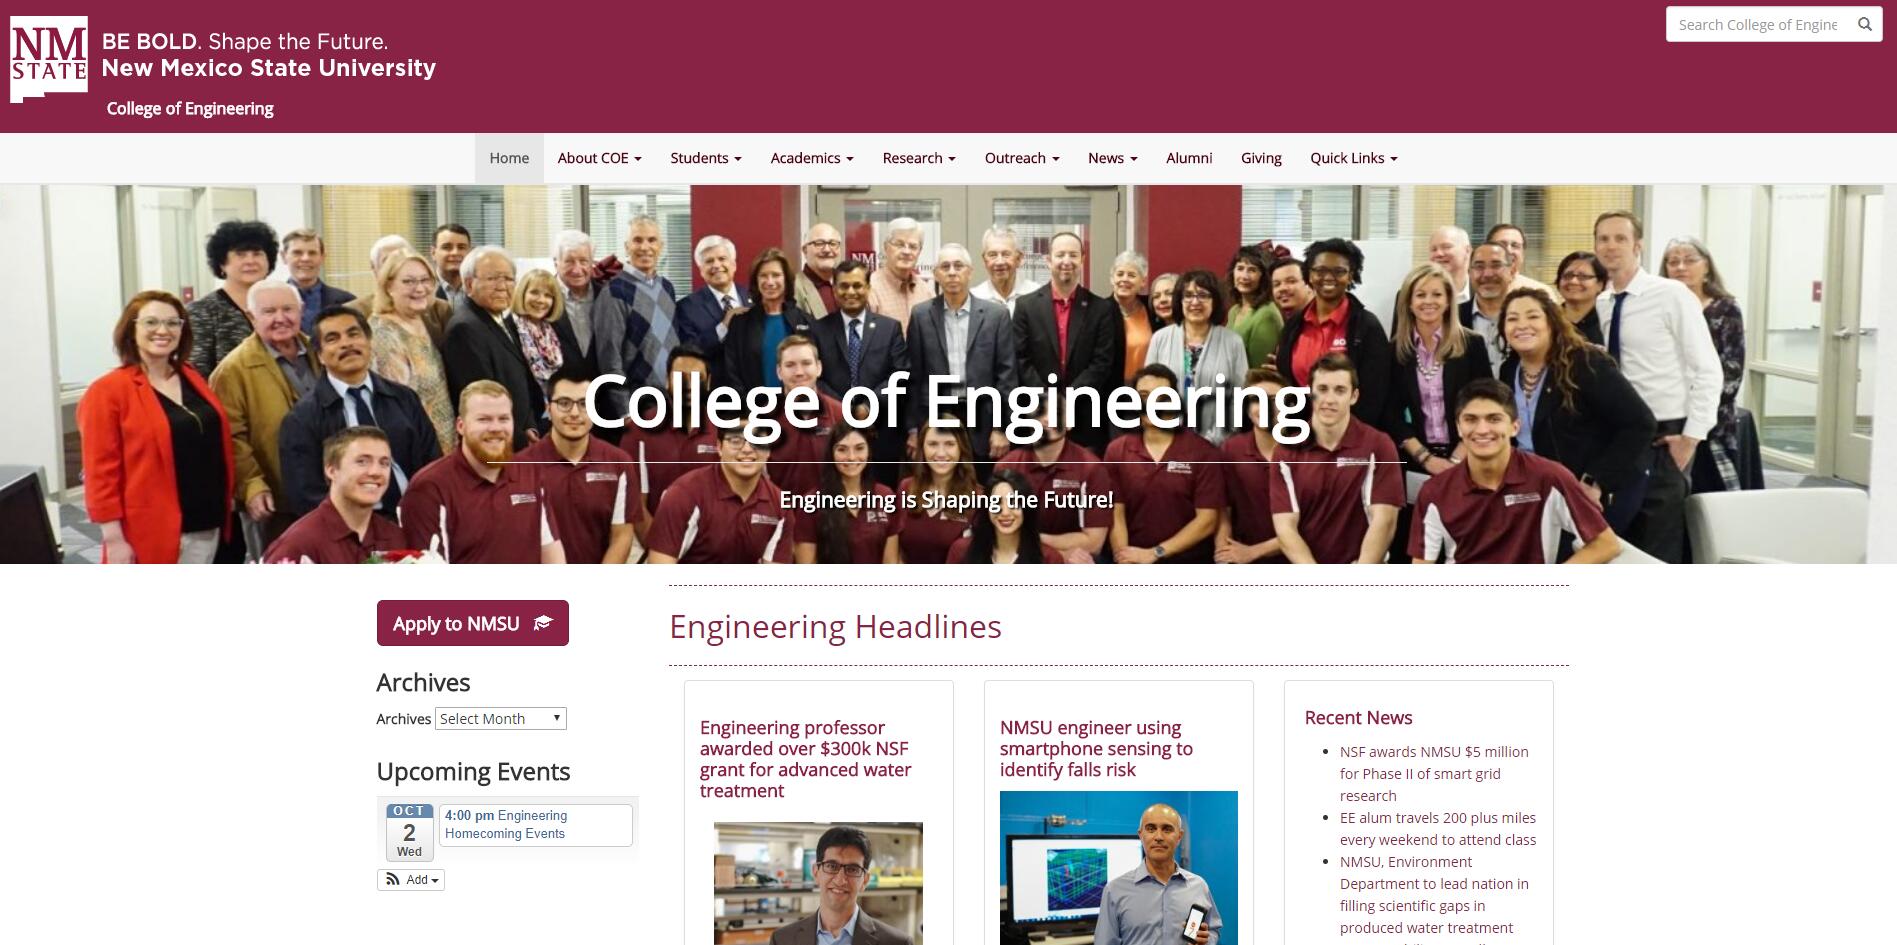 The College of Engineering at New Mexico State University